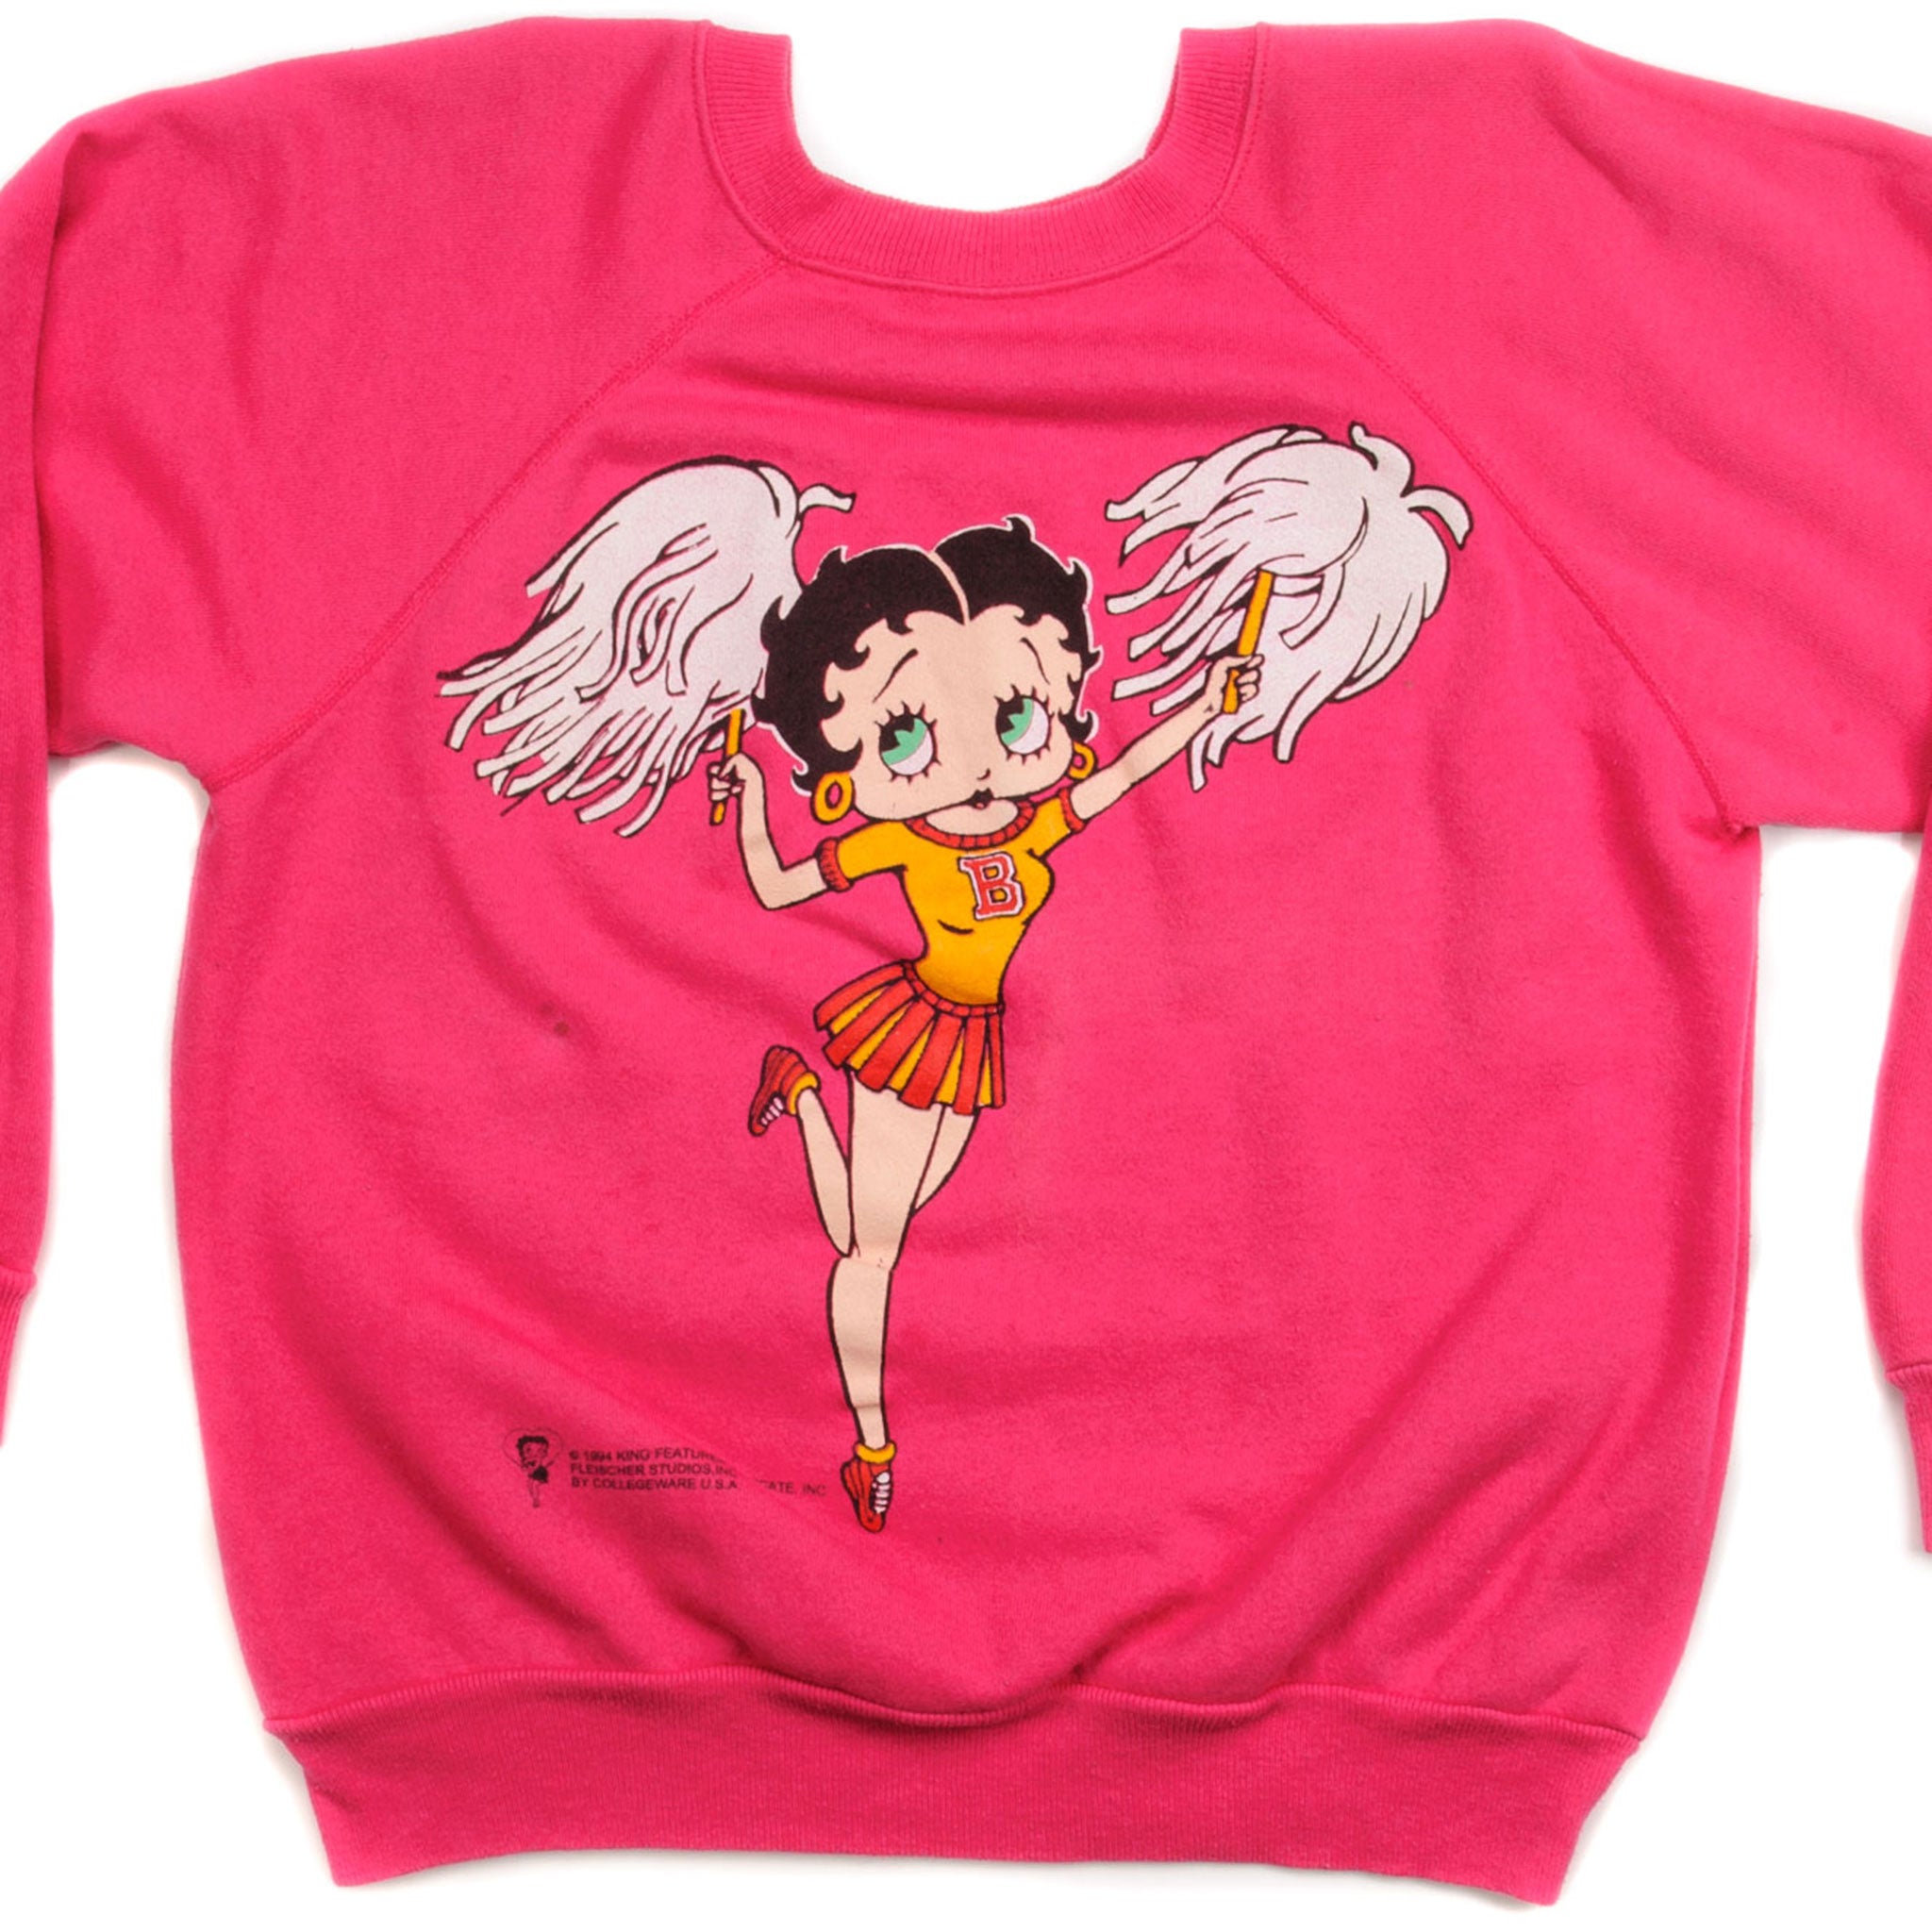 Vintage Betty Boop Sweatshirt Size Large Made In USA – Vintage rare usa